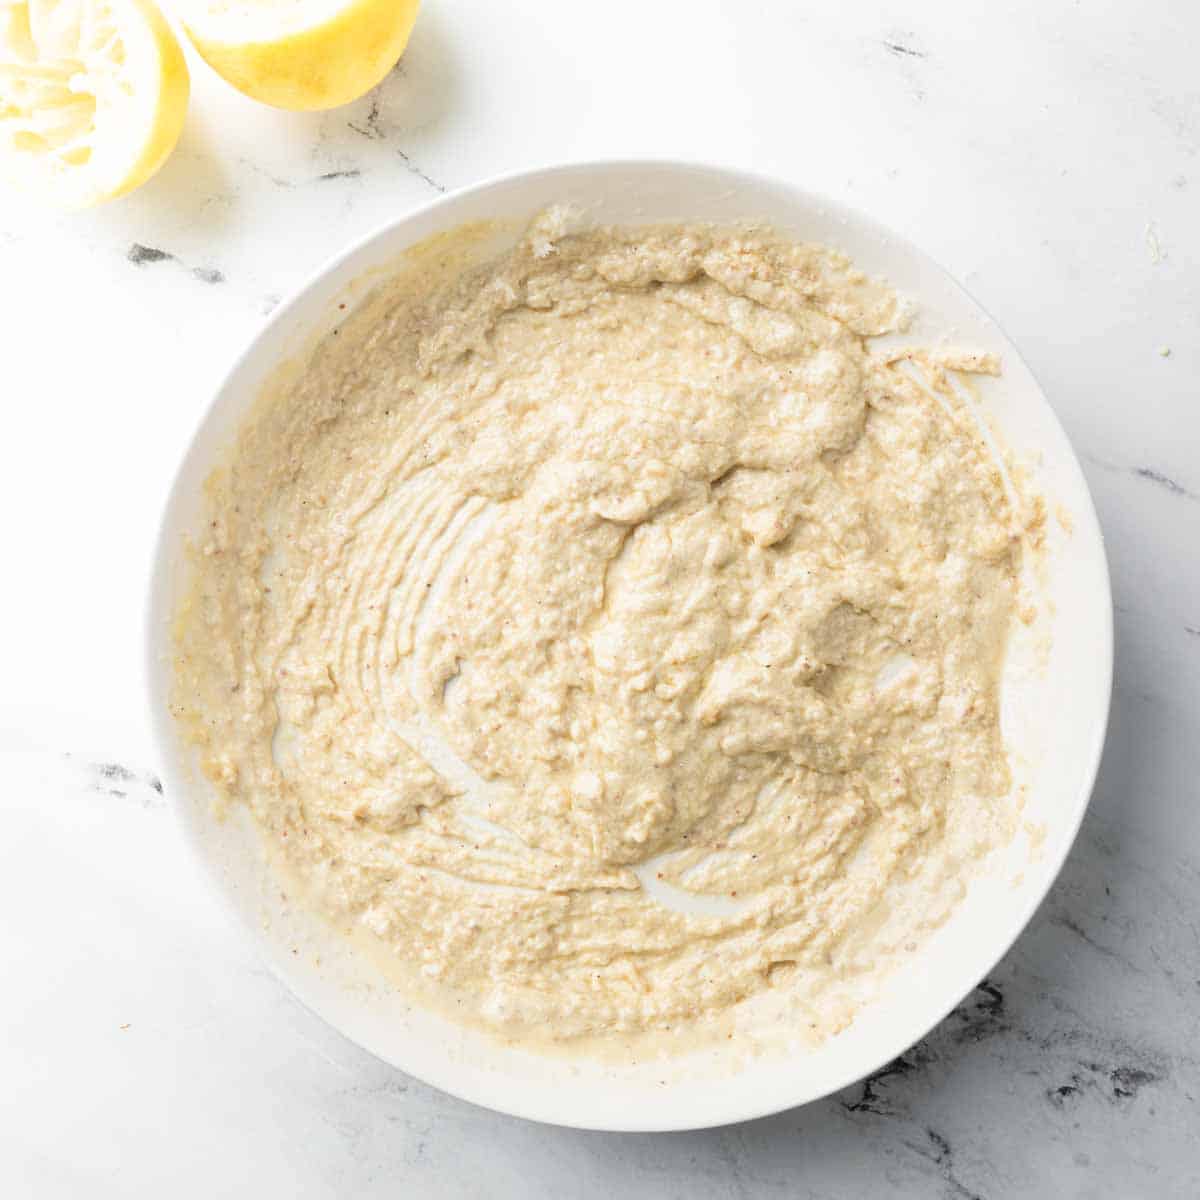 Creamy tahini Parmesan dressing whisked together in a bowl.